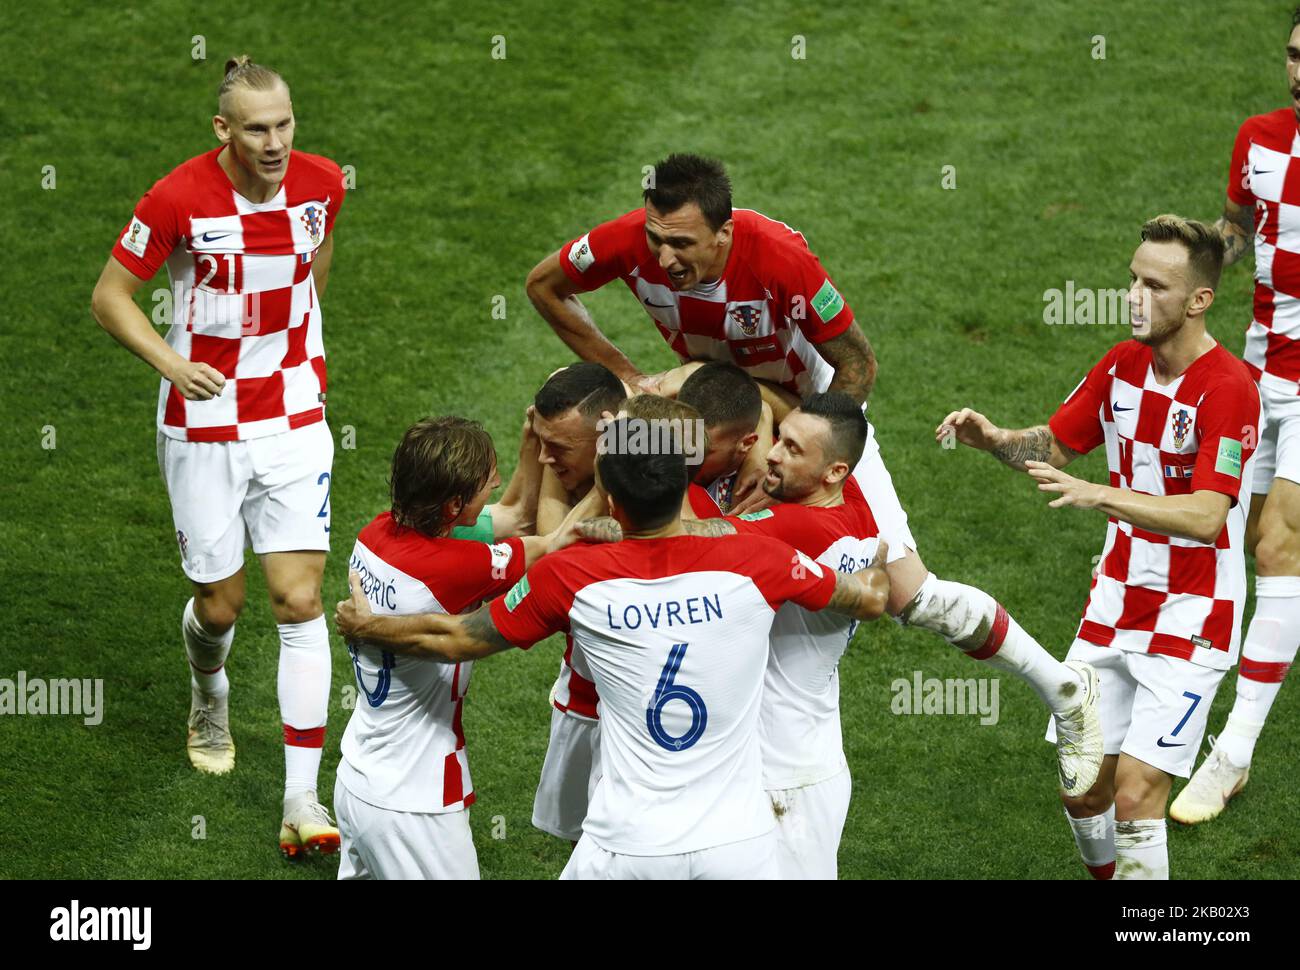 France v Croatia - FIFA World Cup Russia 2018 Final Ivan Perisic (Croatia) celebrate with the teammates after scoring the goal of 1-1 at Luzhniki Stadium in Moscow, Russia on July 15, 2018. (Photo by Matteo Ciambelli/NurPhoto)  Stock Photo